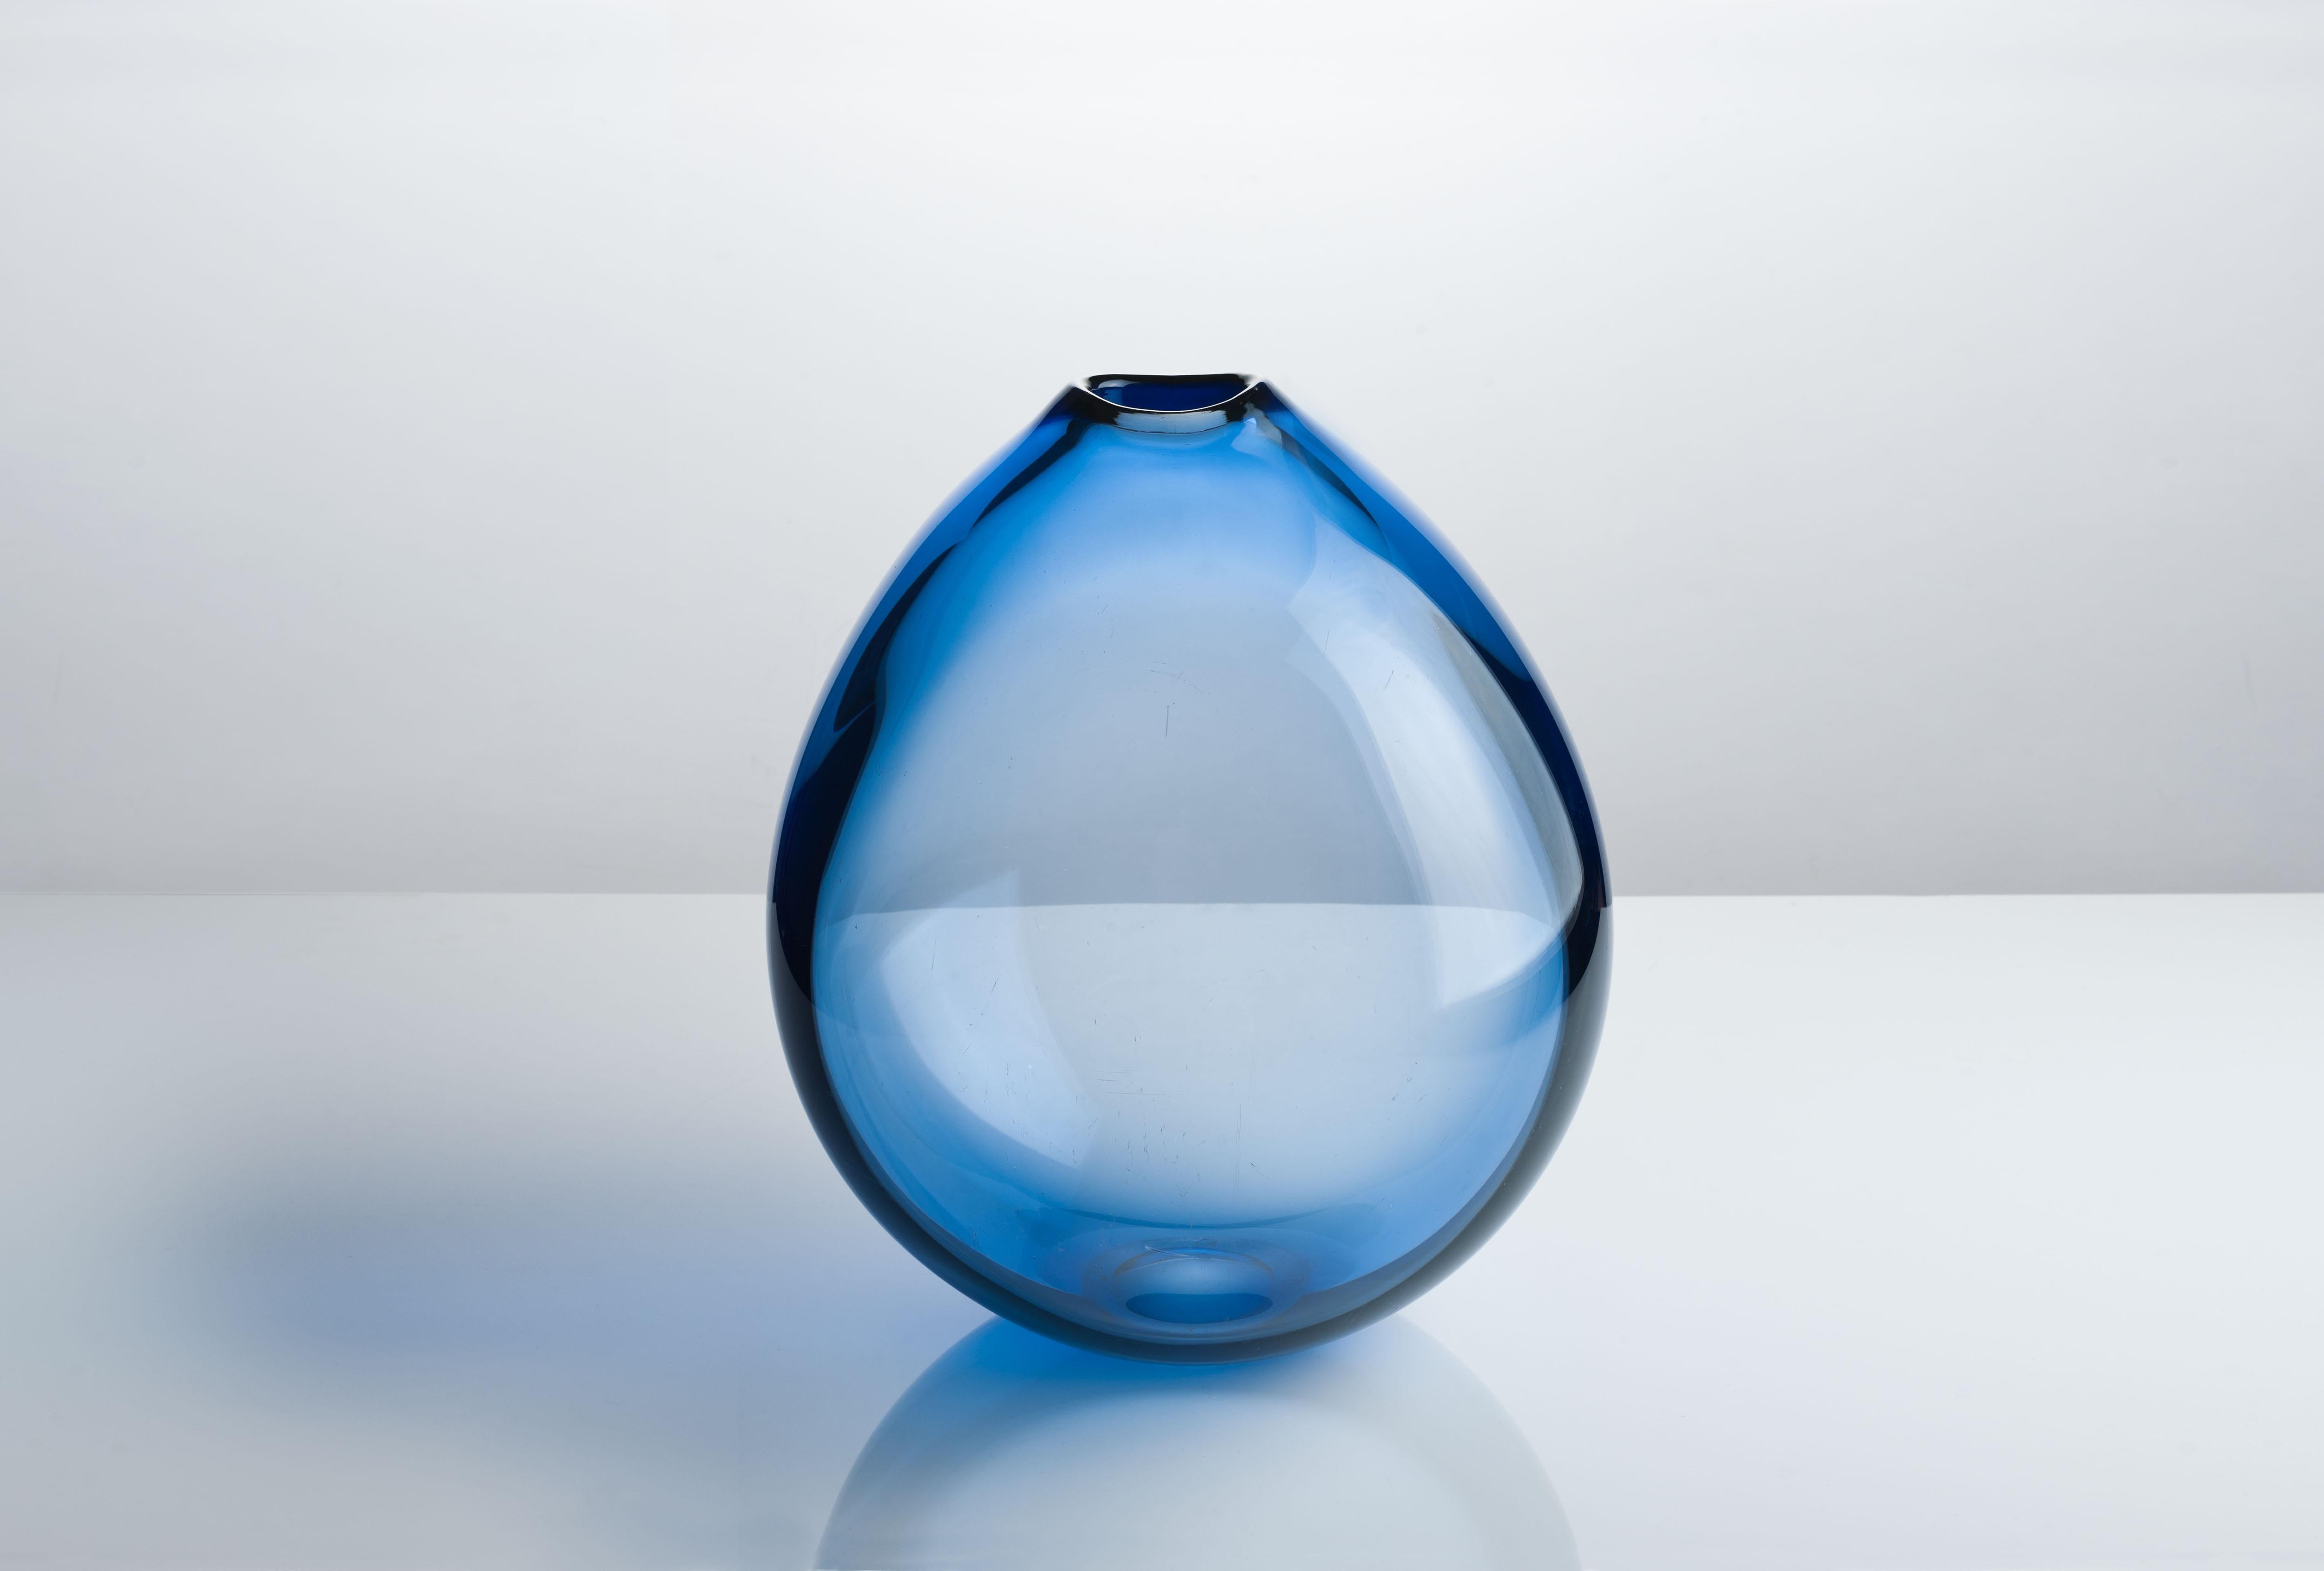 Very rare largest size Sapphire blue 'Dråbe' (Drop) vase from 1959. An iconic design by the Danish glass designer Per Lütken, mouth-blown at Holmegaard Denmark.
The distinctive and characteristic neck of the vase shows the unique character and value